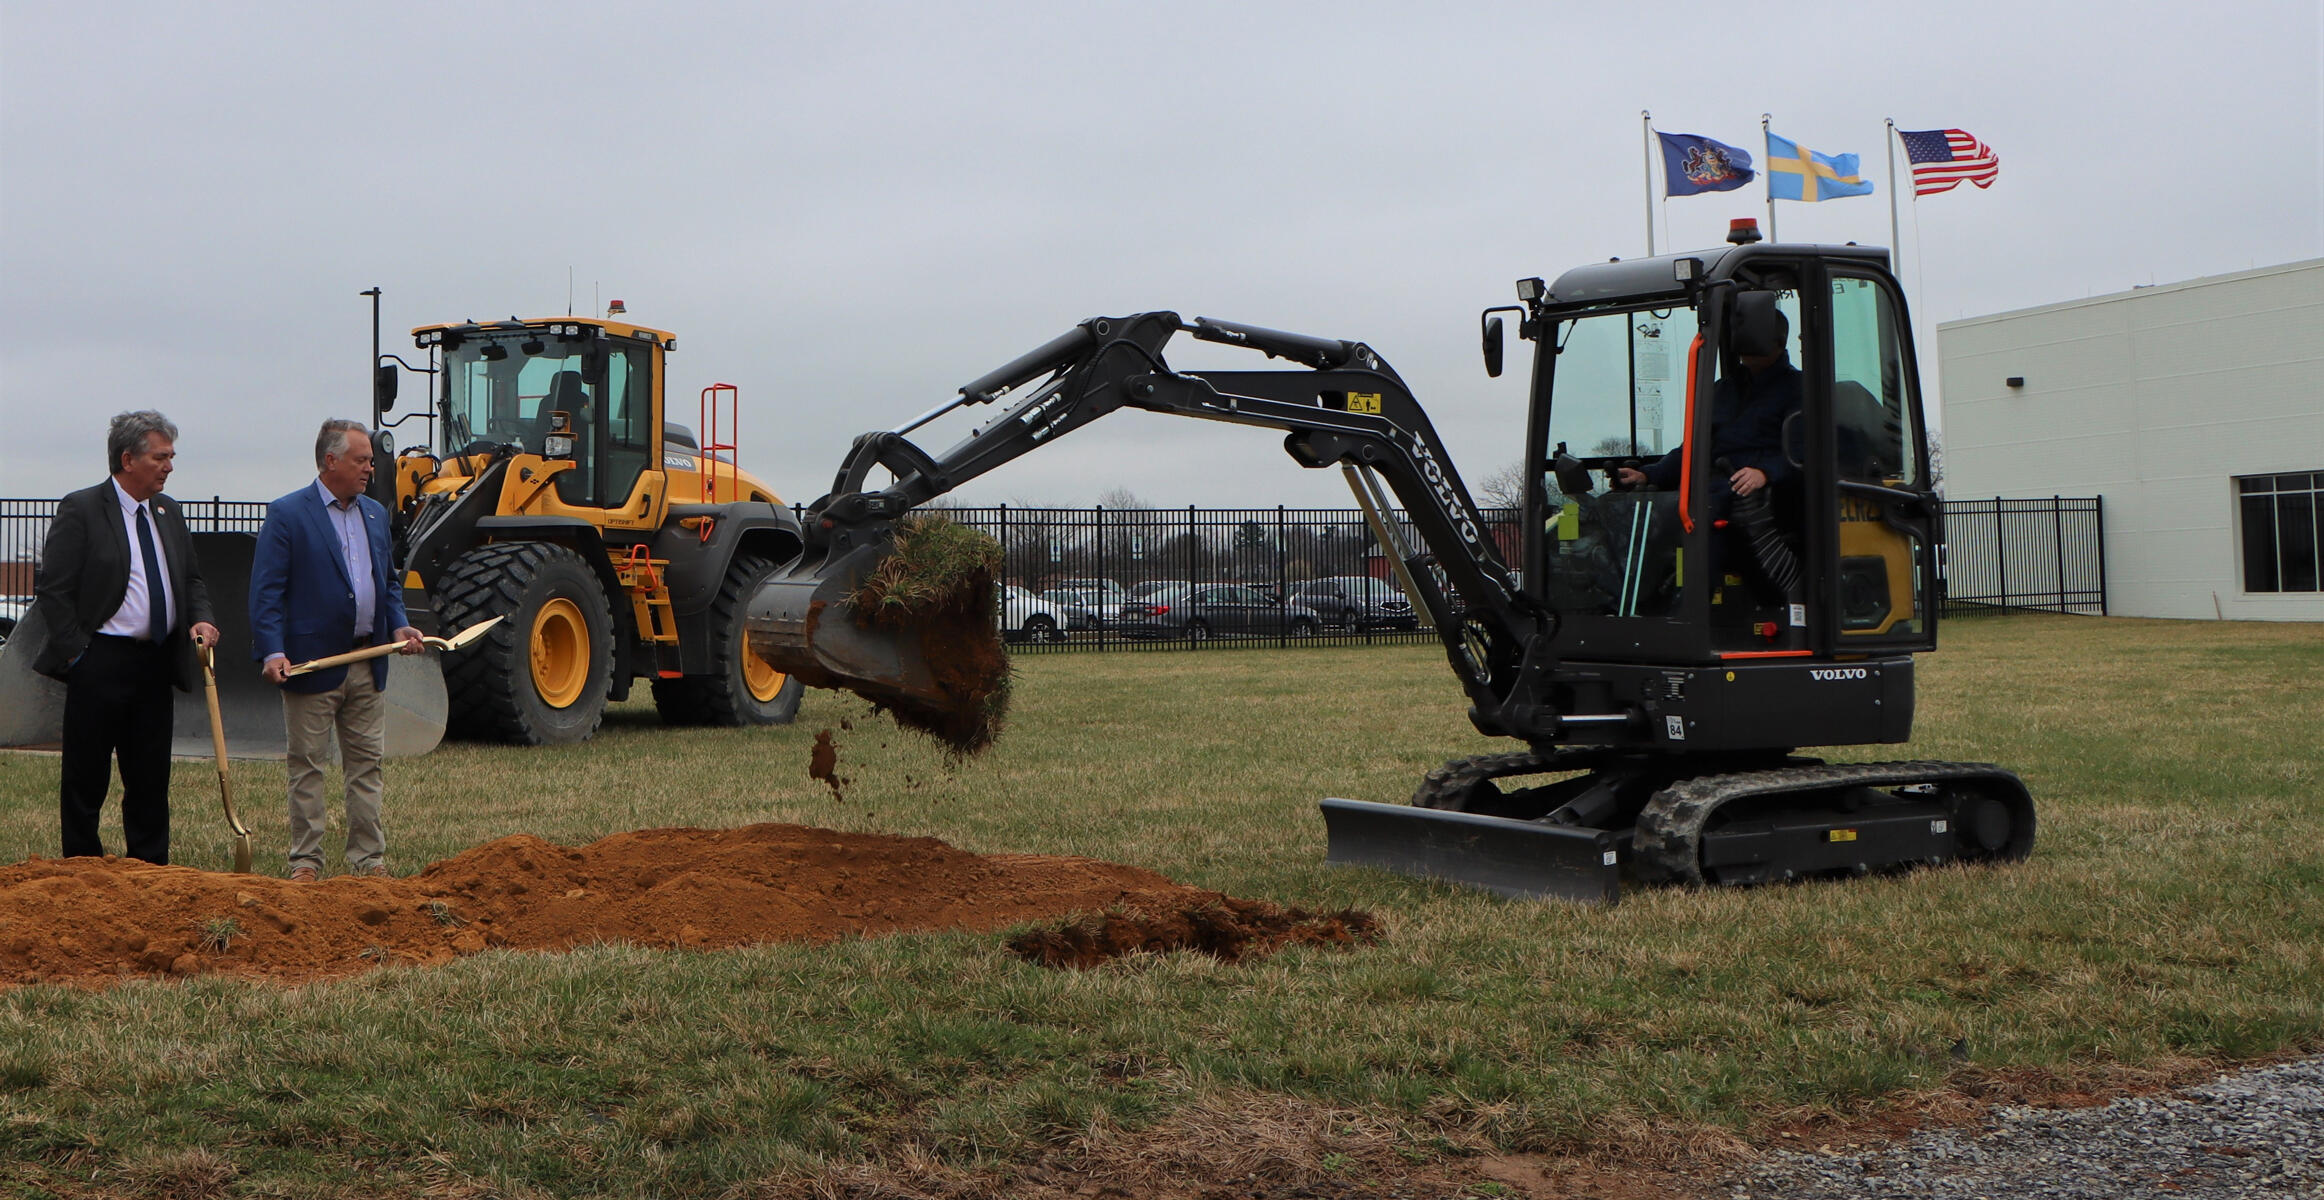 A Volvo ECR25 Electric compact excavator breaks ground on the new Volvo CE technician training center in Shippensburg, Pennsylvania. 